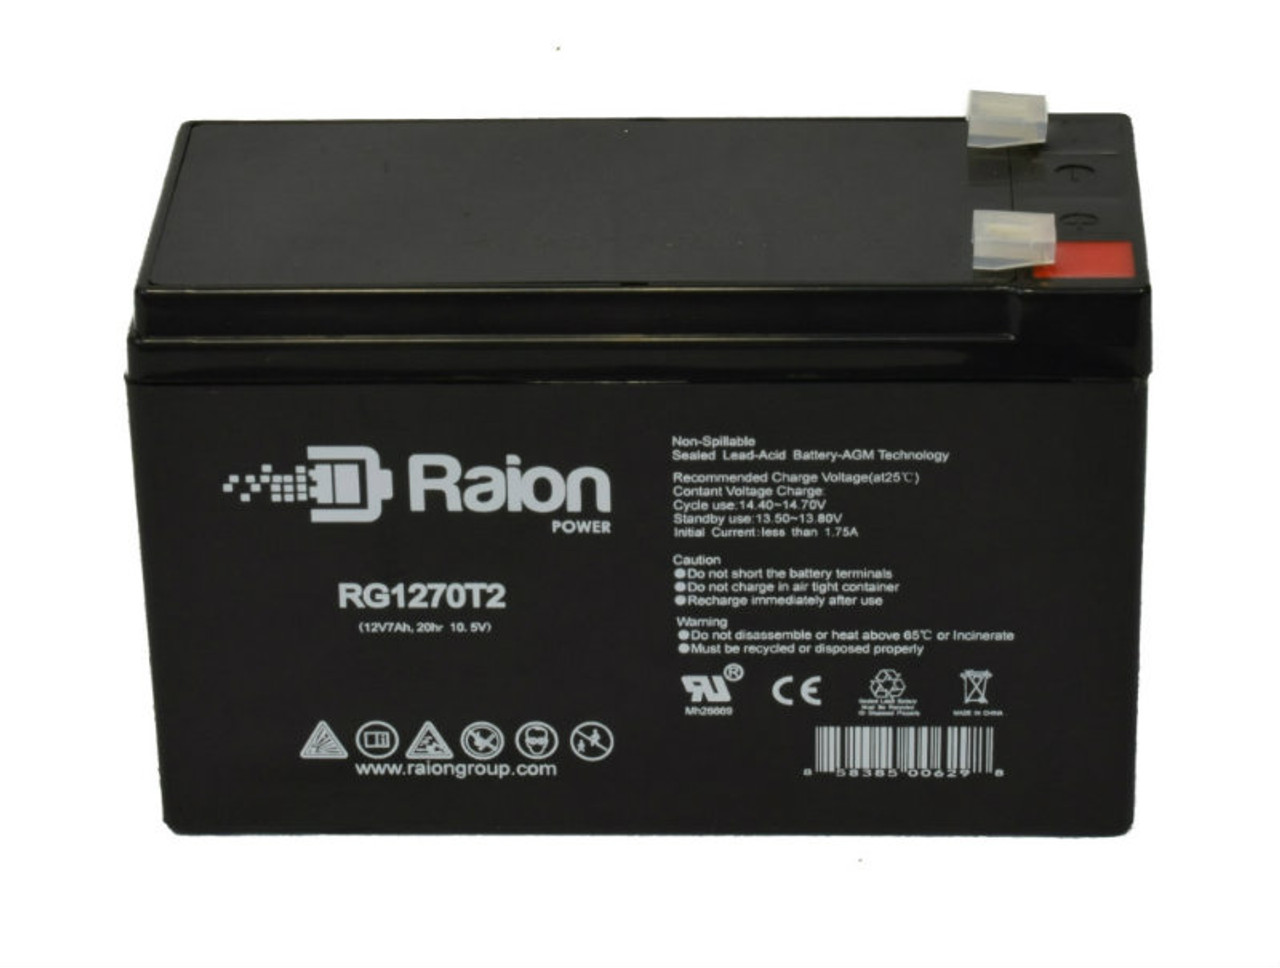 Raion Power RG1270T1 12V 7Ah Lead Acid Battery for Harmar CSL500 Helix Curved Stairlift